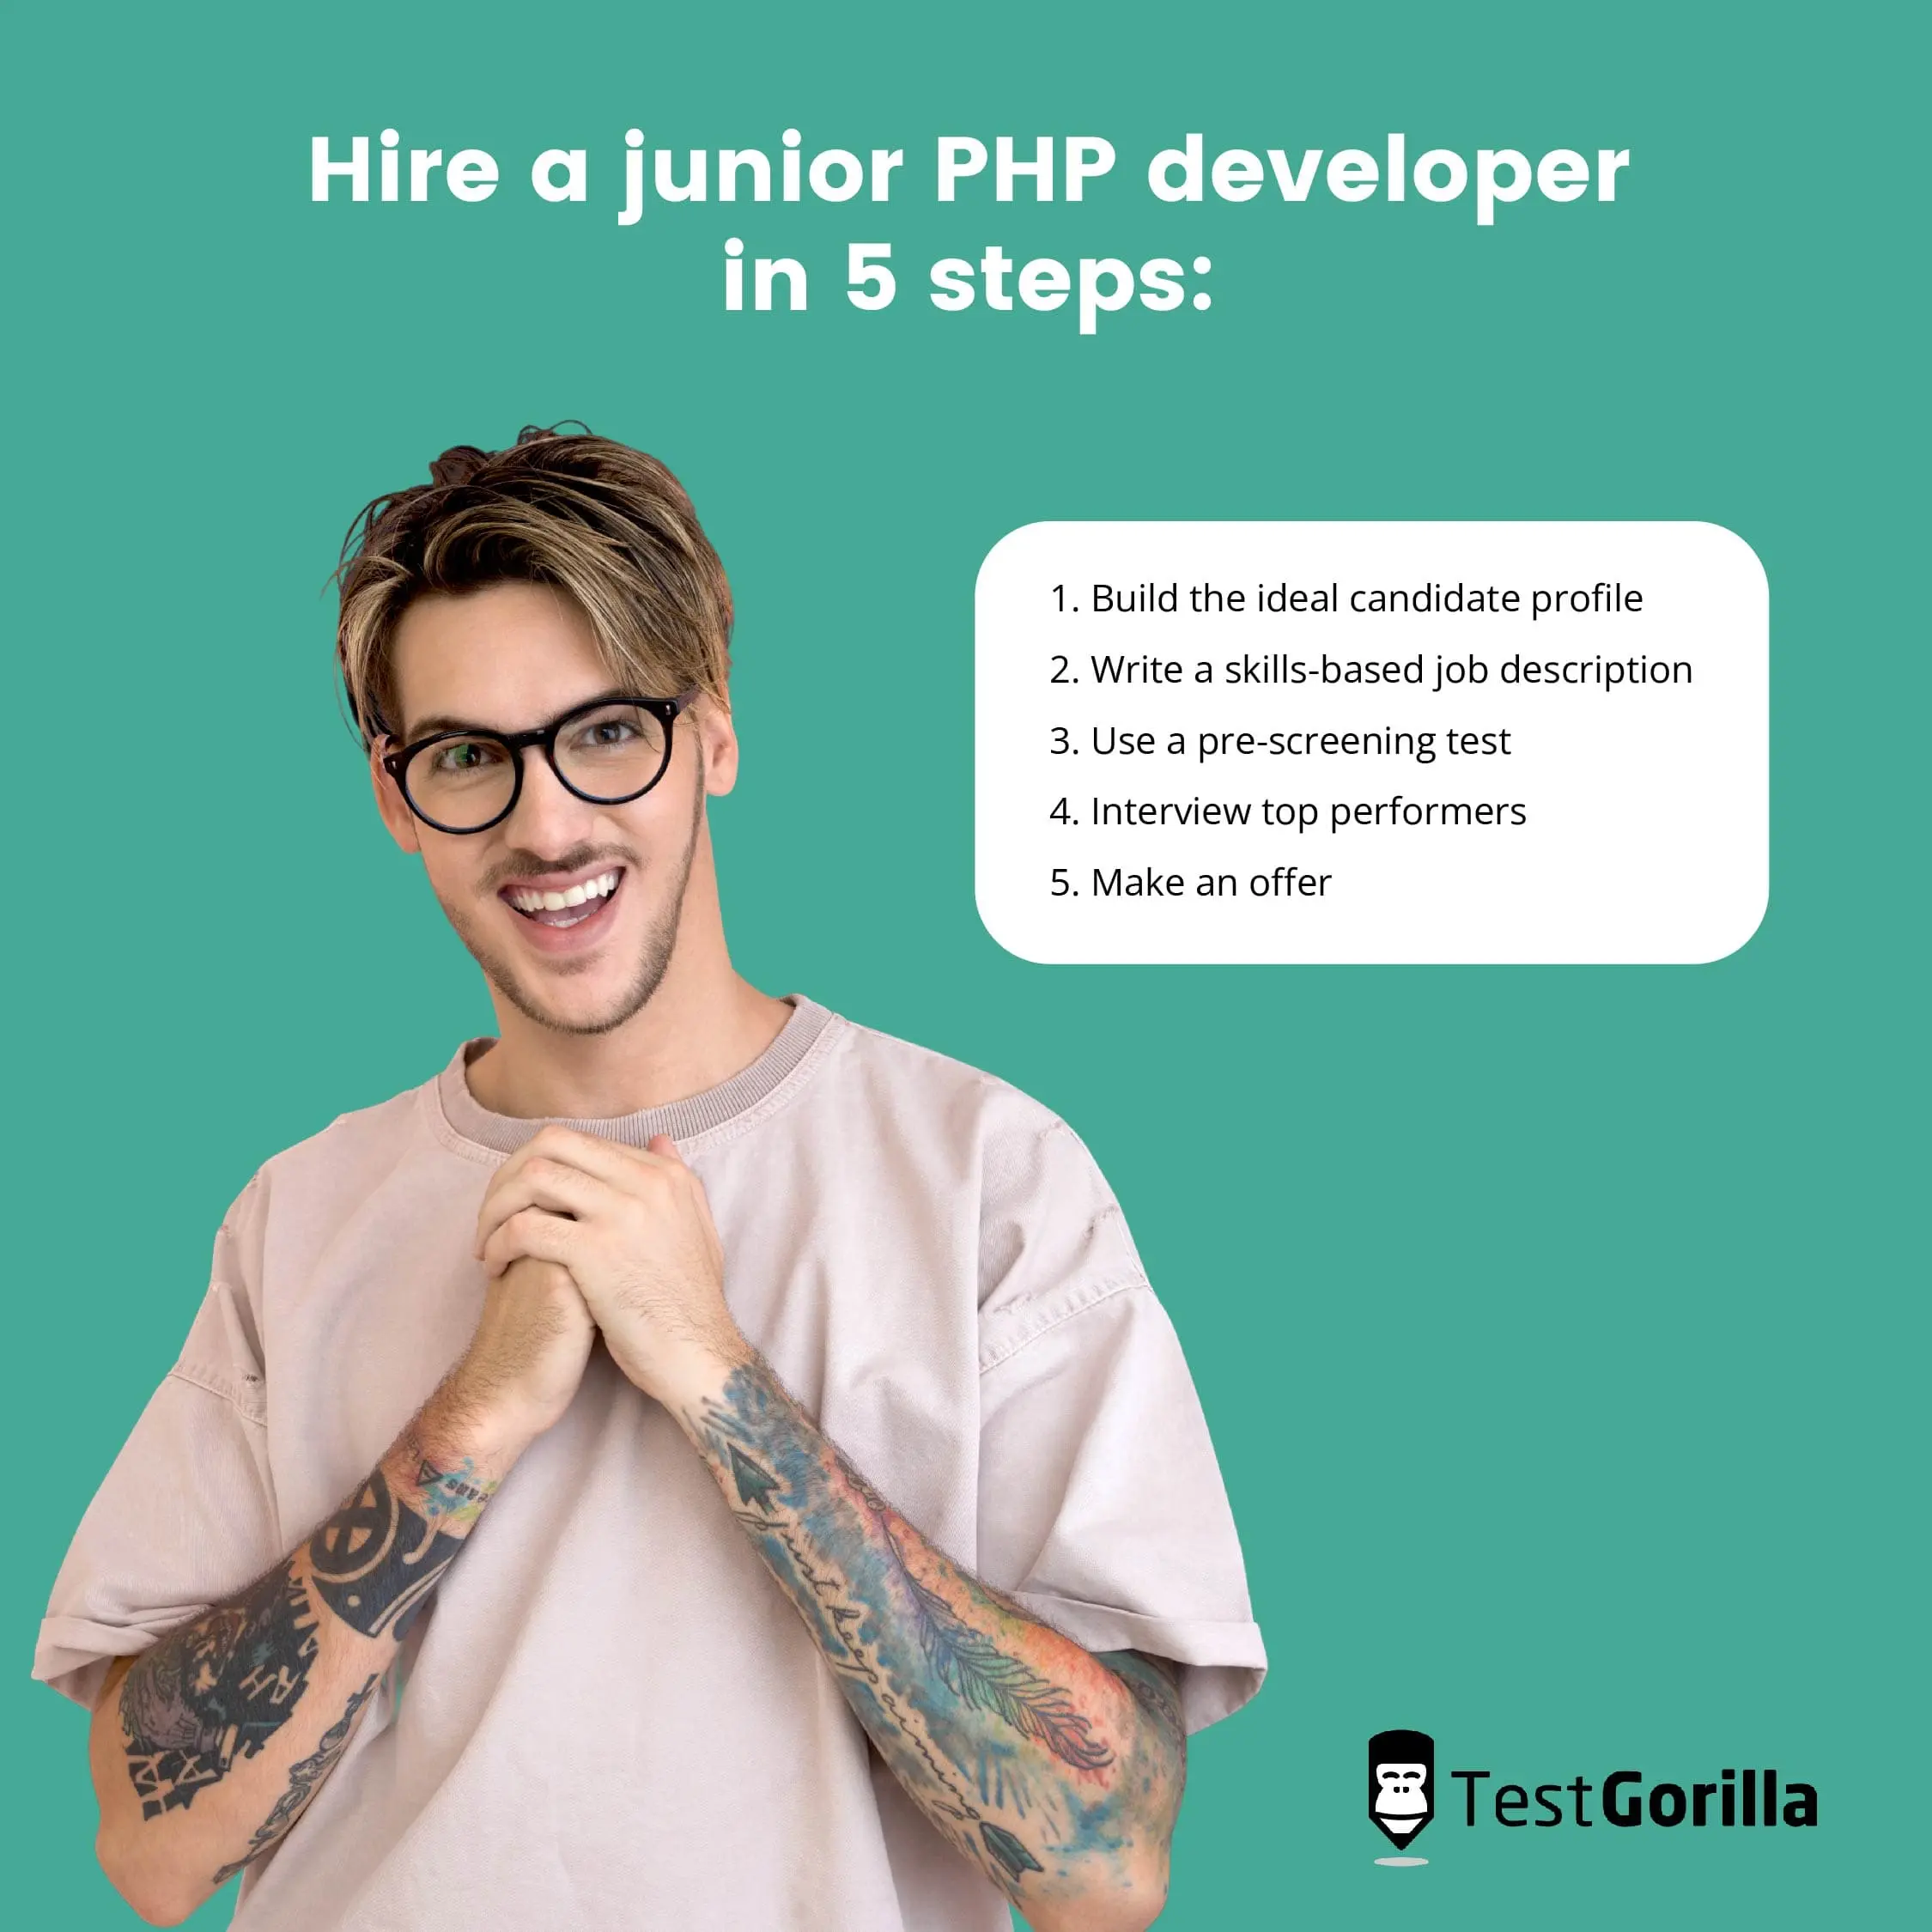 How to hire a junior PHP developer in 5 steps